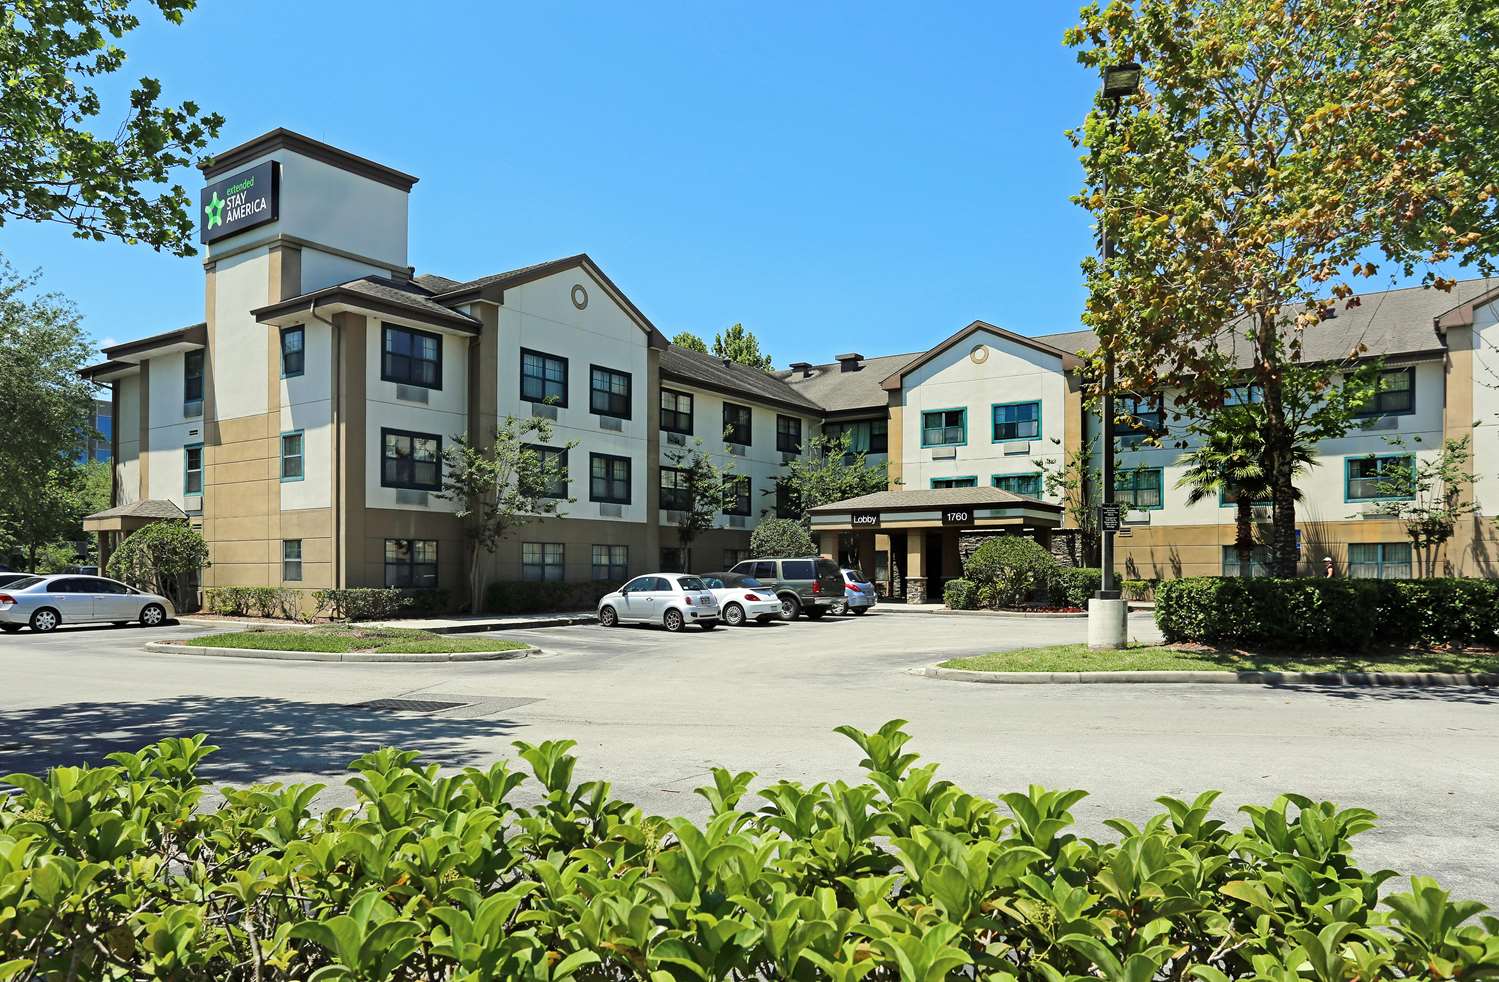 Pet Friendly Extended Stay America - Orlando - Maitland - 1760 Pembrook Dr. in Orlando, Florida